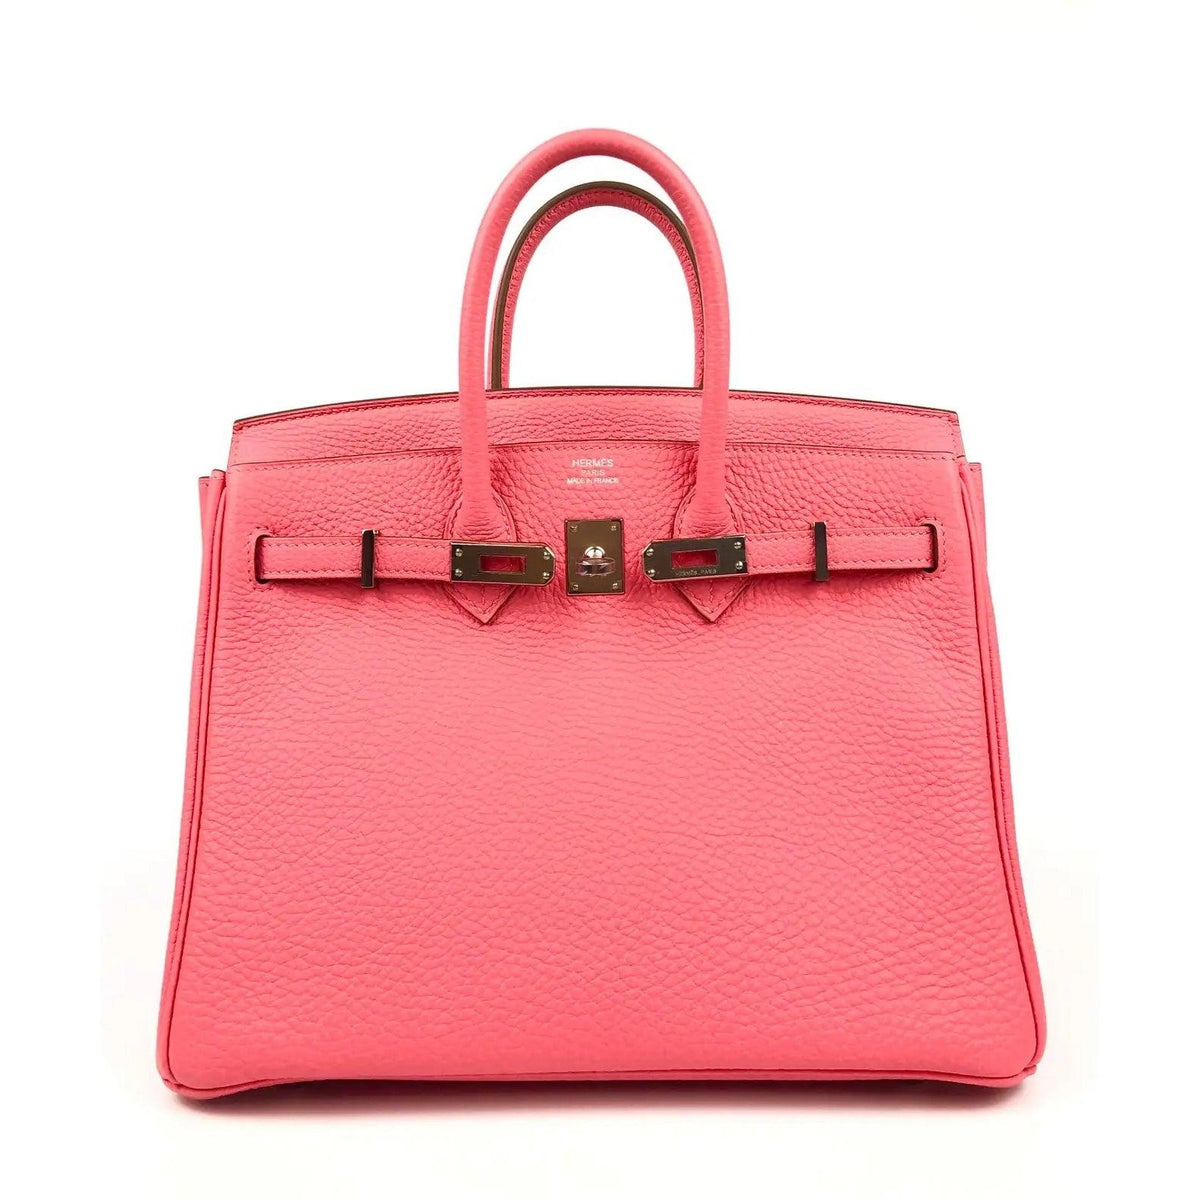 Pre-owned Rare HERMES Birkin 25 Rose Lipstick Pink Togo Leather Bag - theREMODA